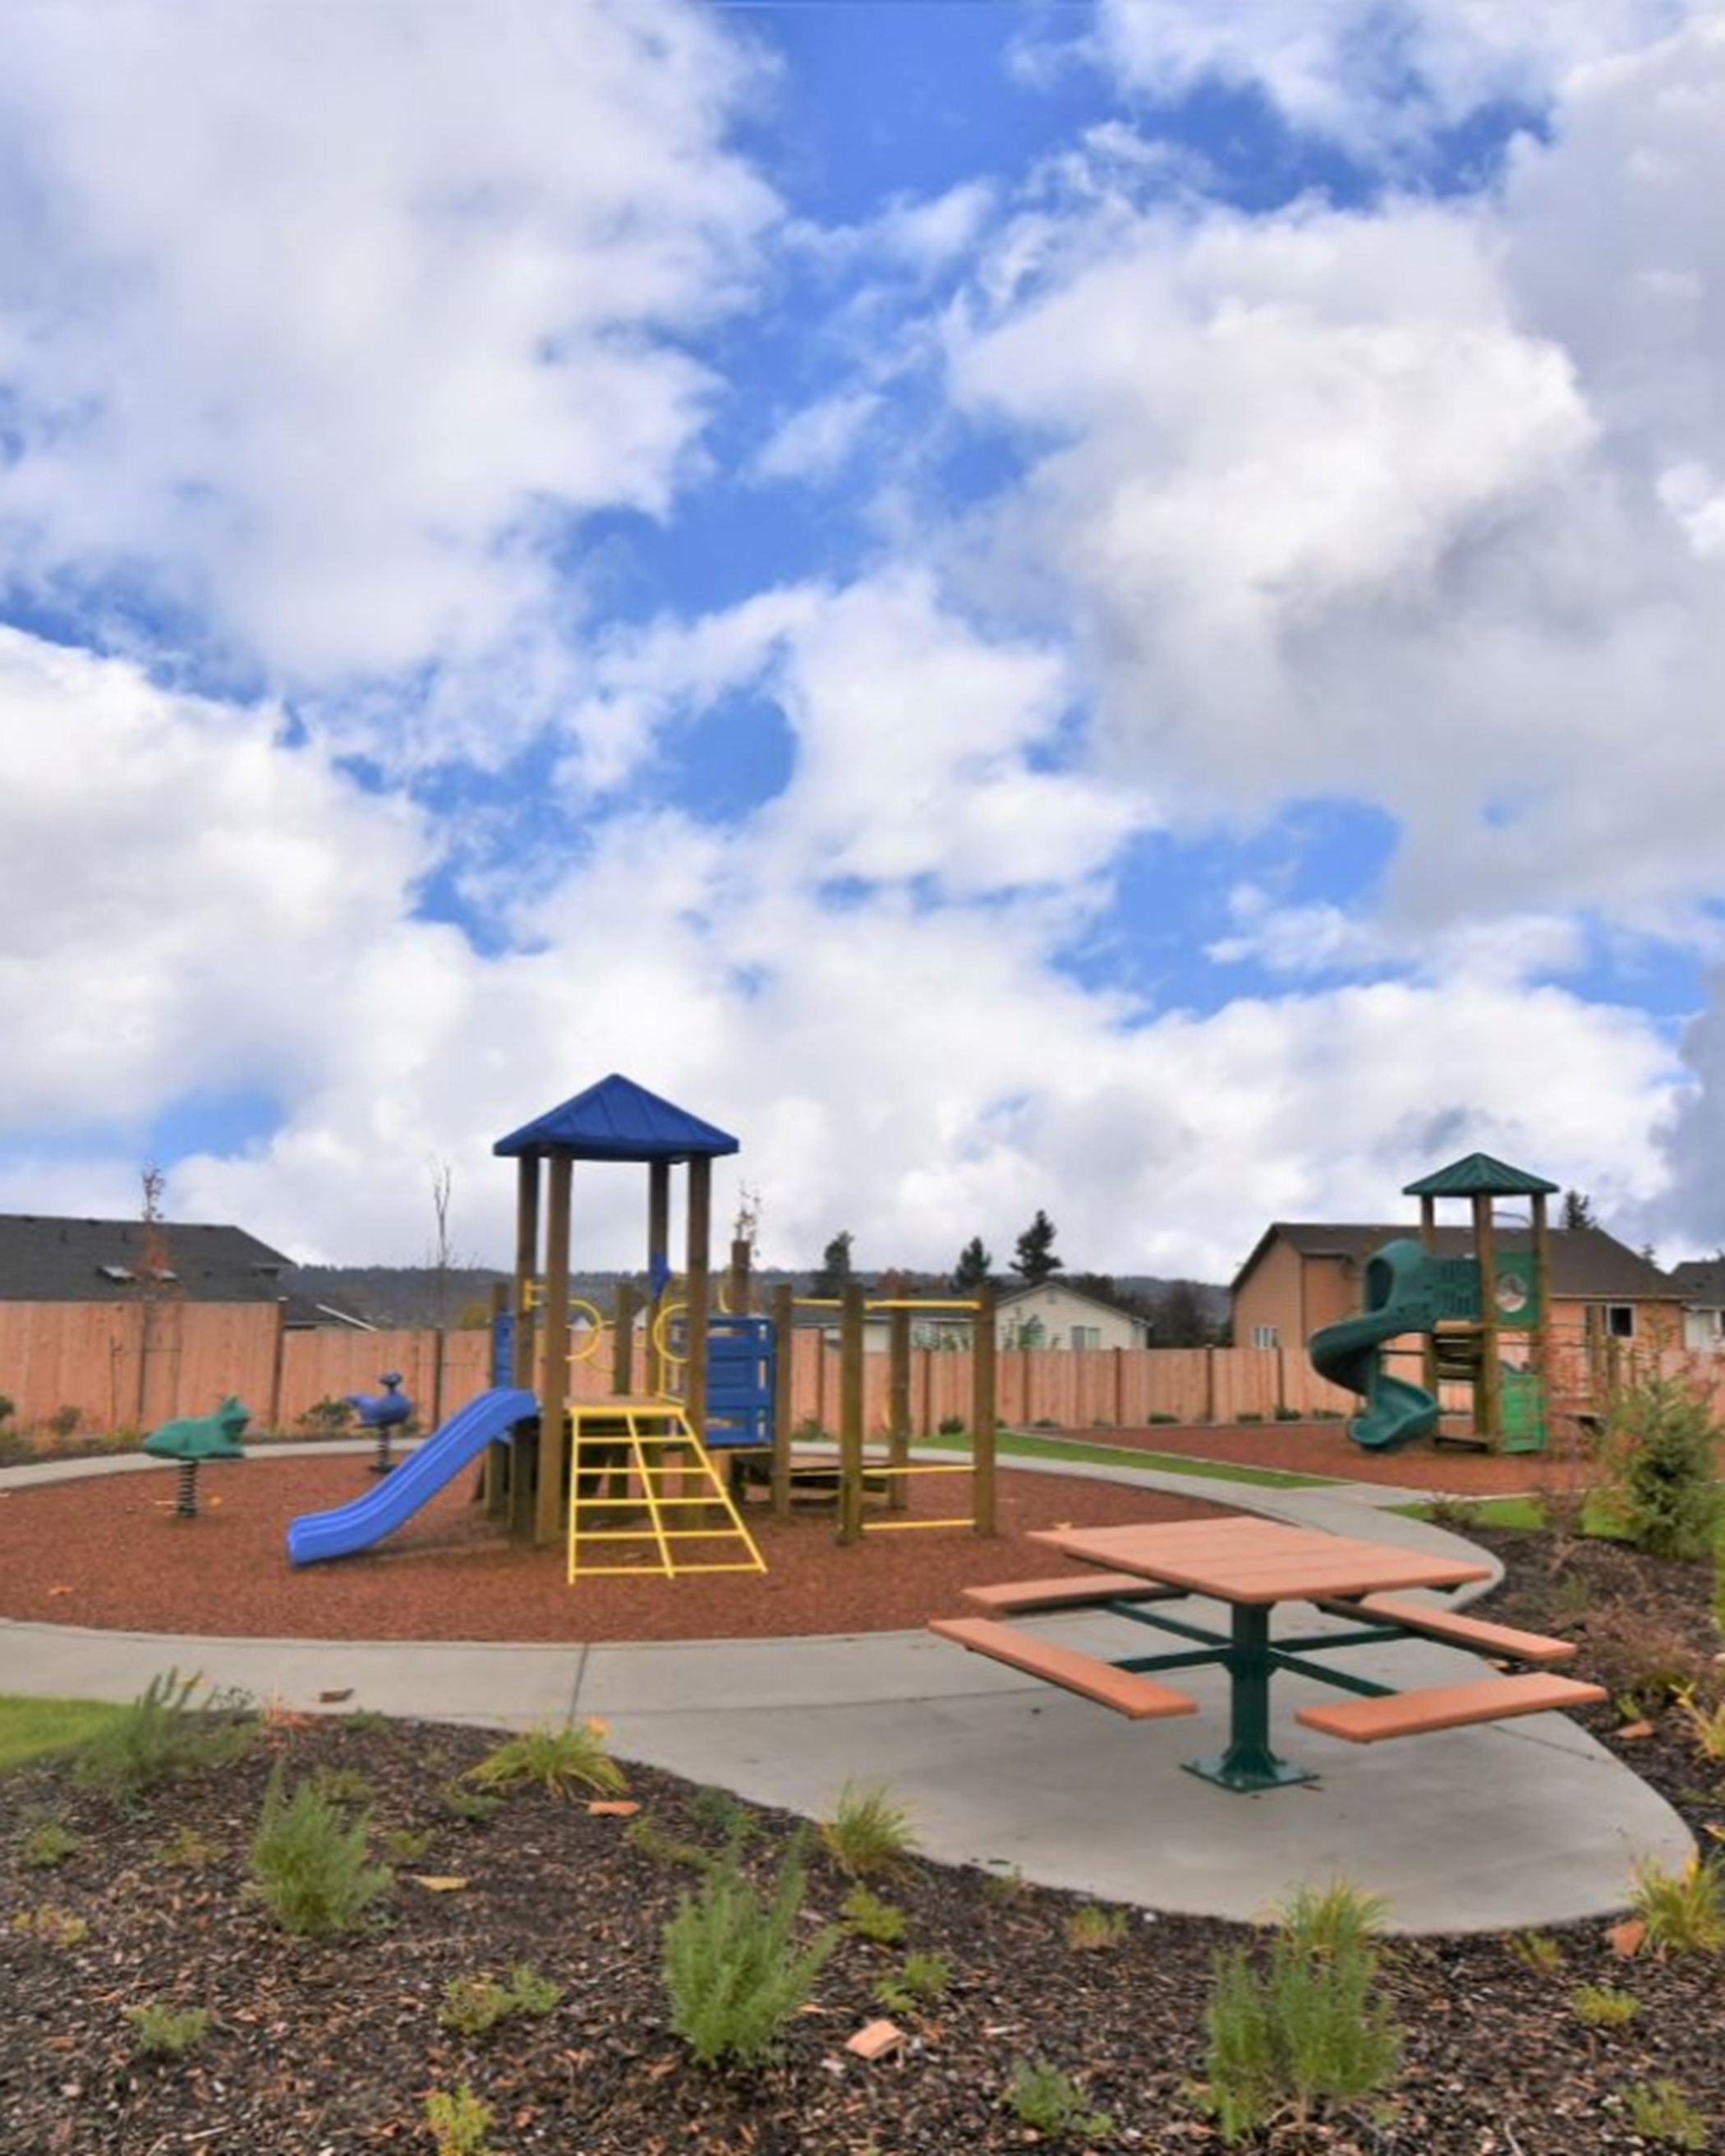 Playground with two jungle gyms and picnic tables